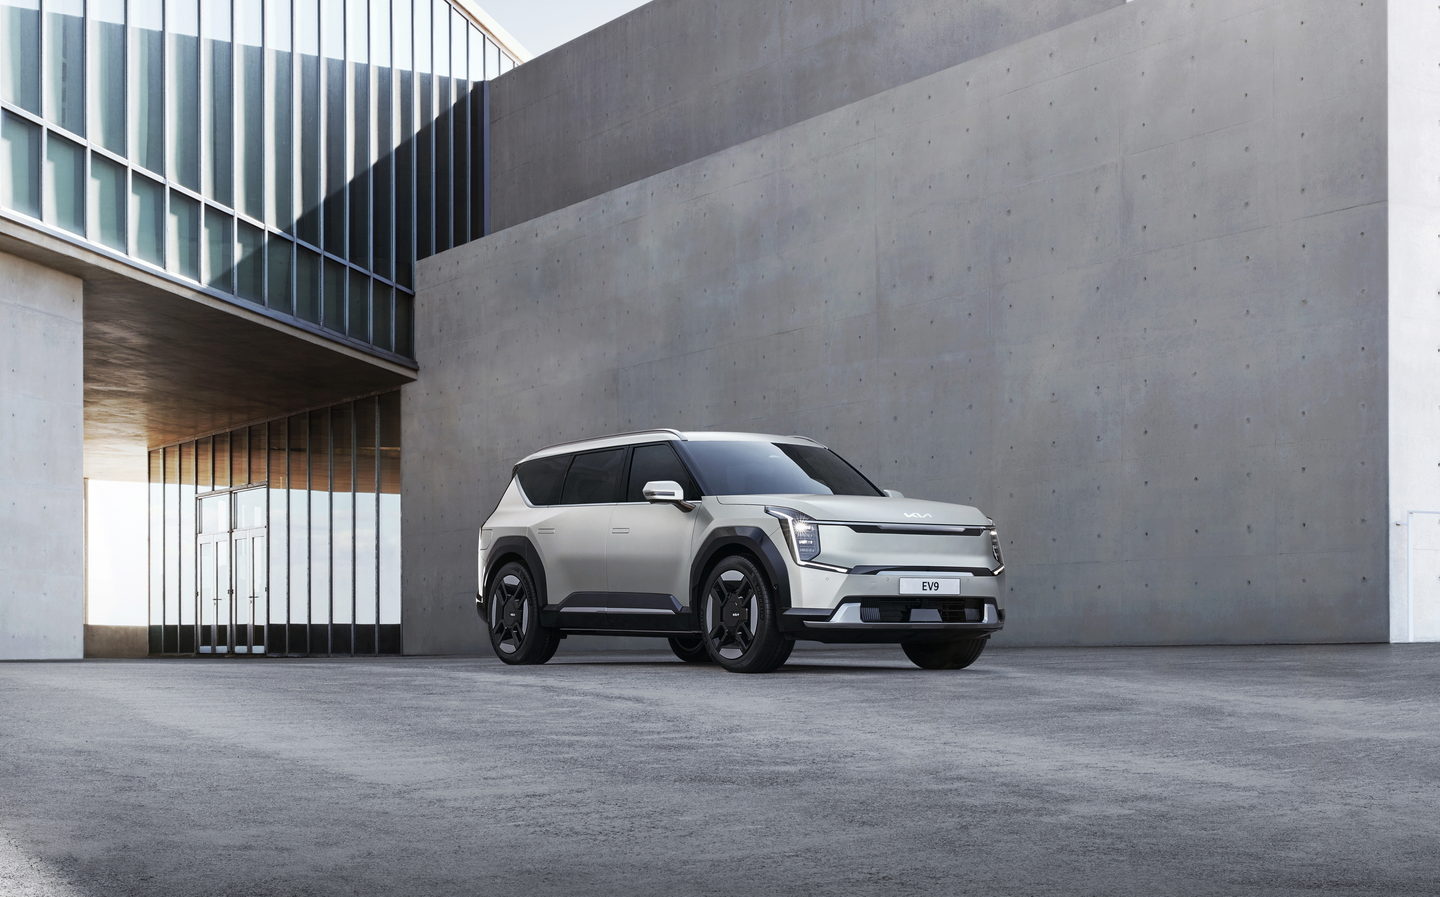 electric cars, seven-seater, suv (large), seven-seat kia ev9 suv gets up to 336 miles of range and ultra-rapid charging